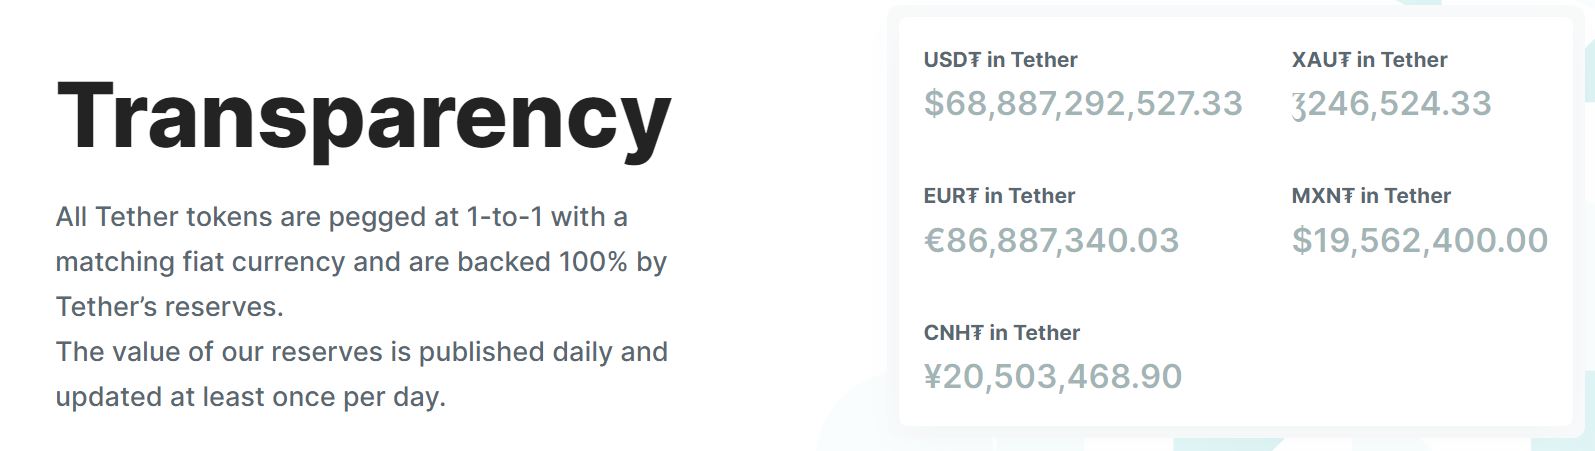 Tether USDT Transparency Page